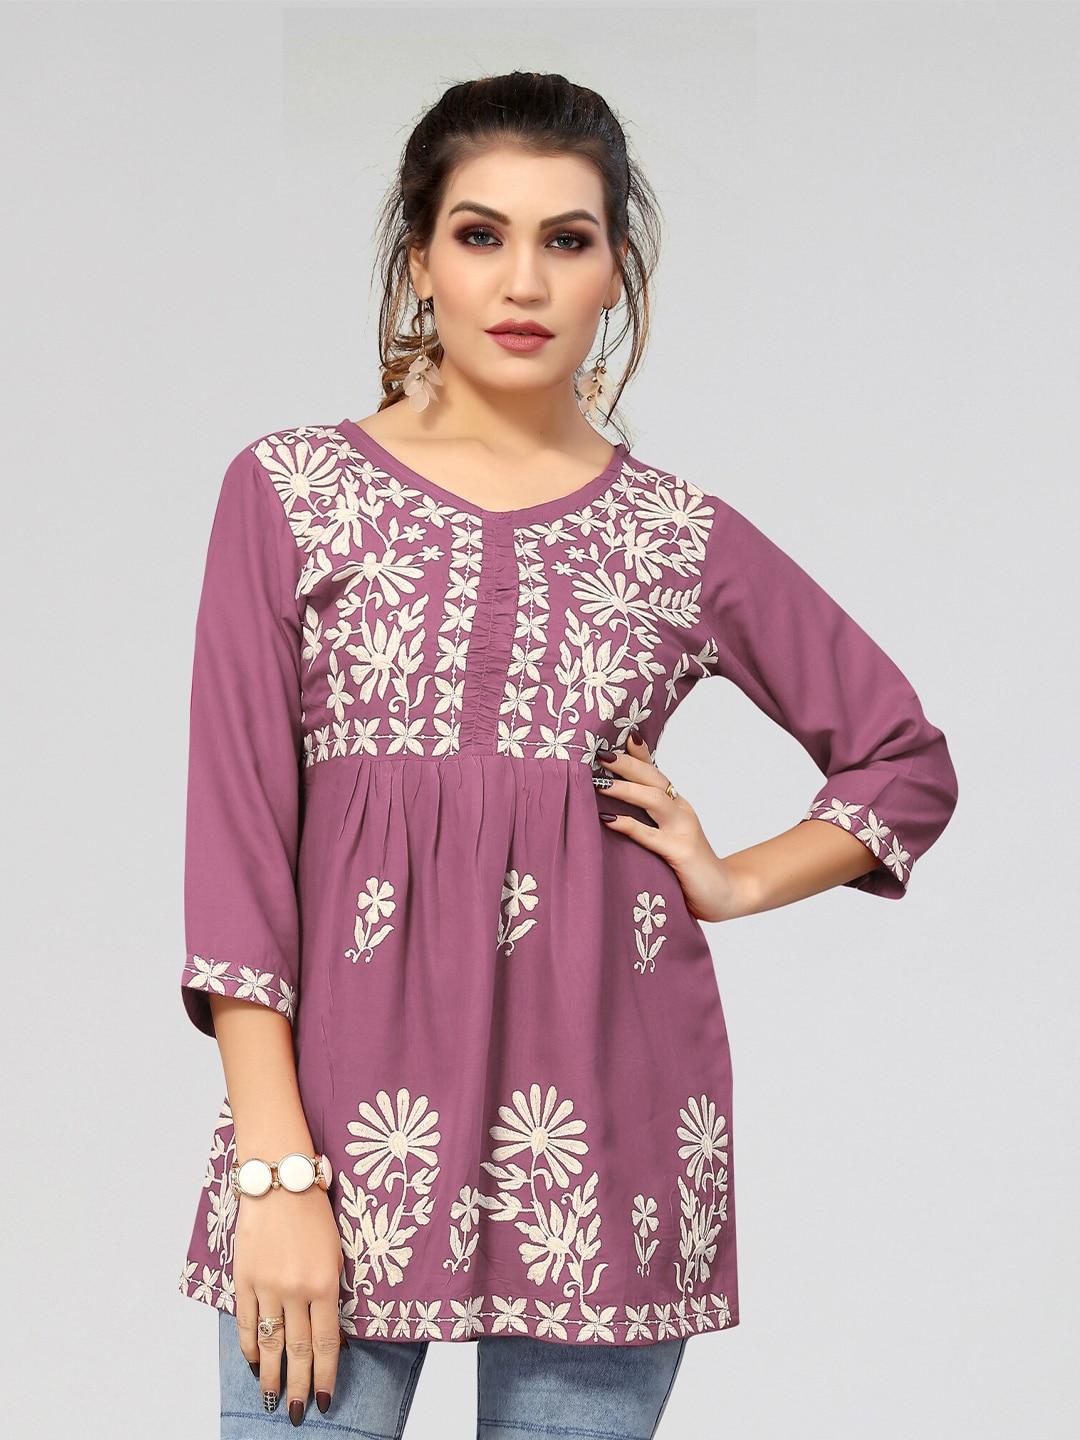 winza-designer-floral-embroidered-a-line-top